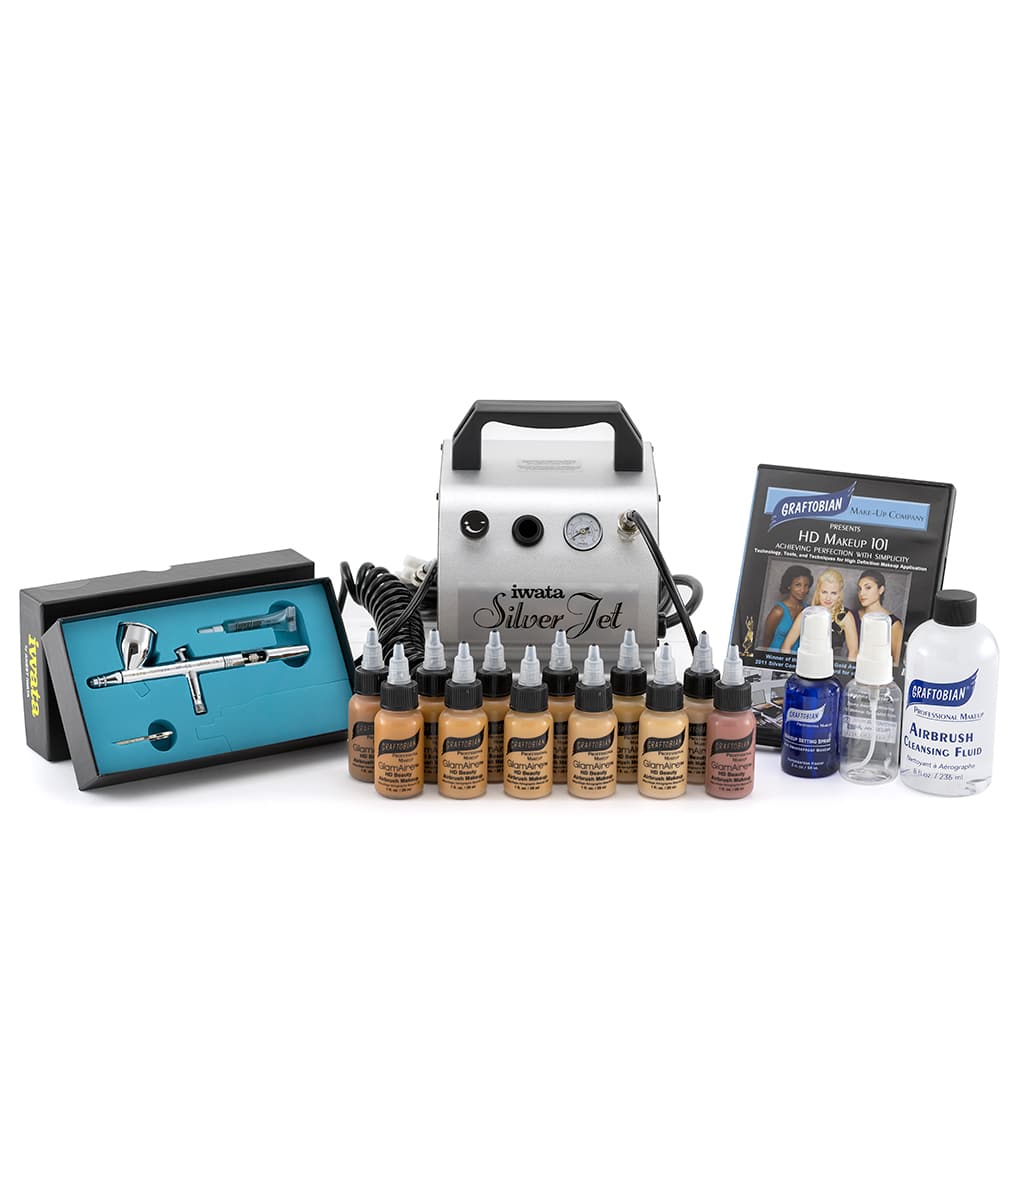 Manufacturer Supplier China Cheap Aerografo Airbrush Compressor Kit  Airbrush Makeup Compressor Kit - Buy Manufacturer Supplier China Cheap  Aerografo Airbrush Compressor Kit Airbrush Makeup Compressor Kit Product on